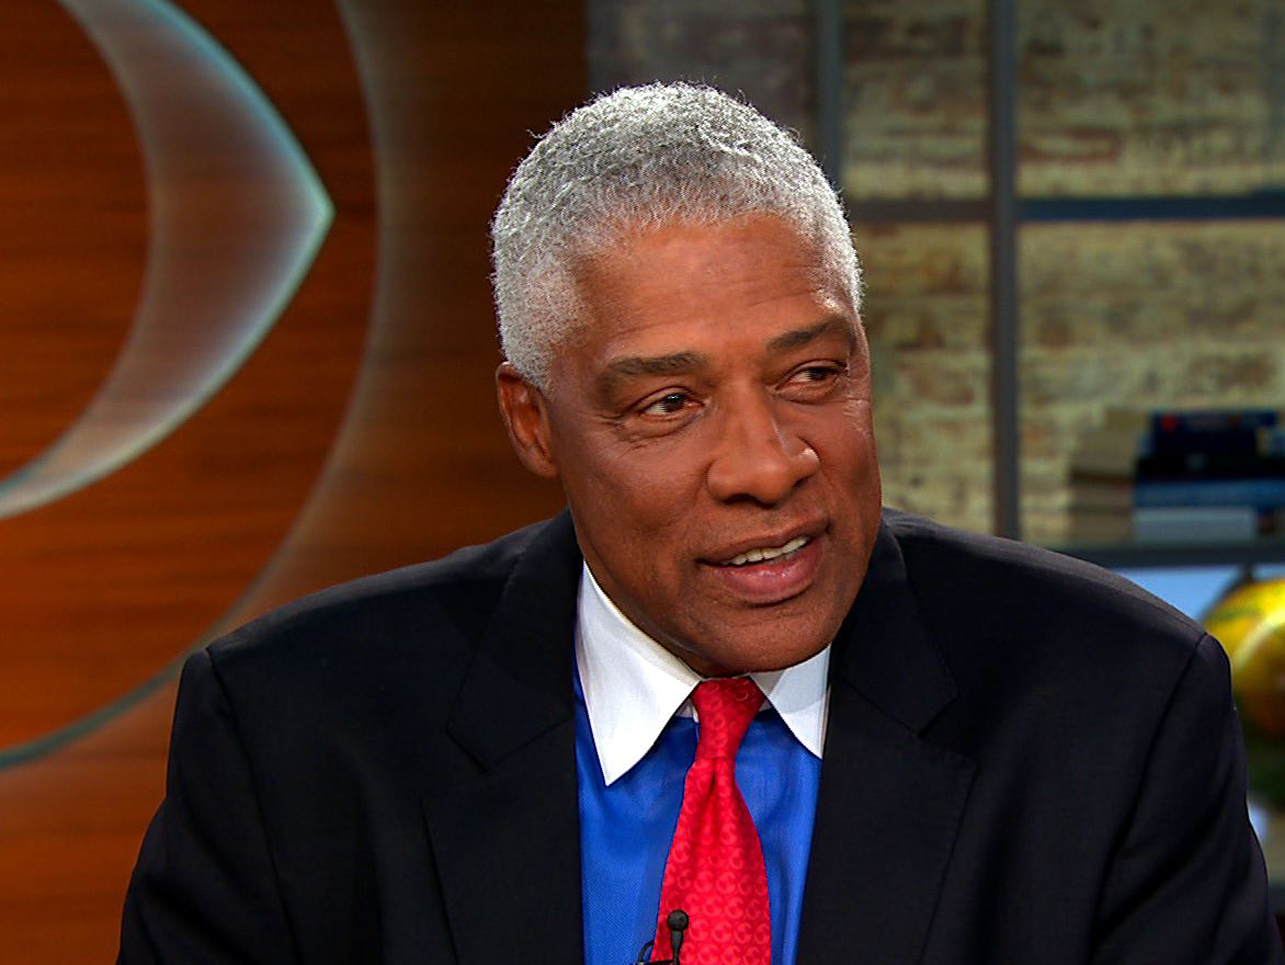 Dr J On Womanzing And Having No Justification For Hitting Ex Wife Cbs News